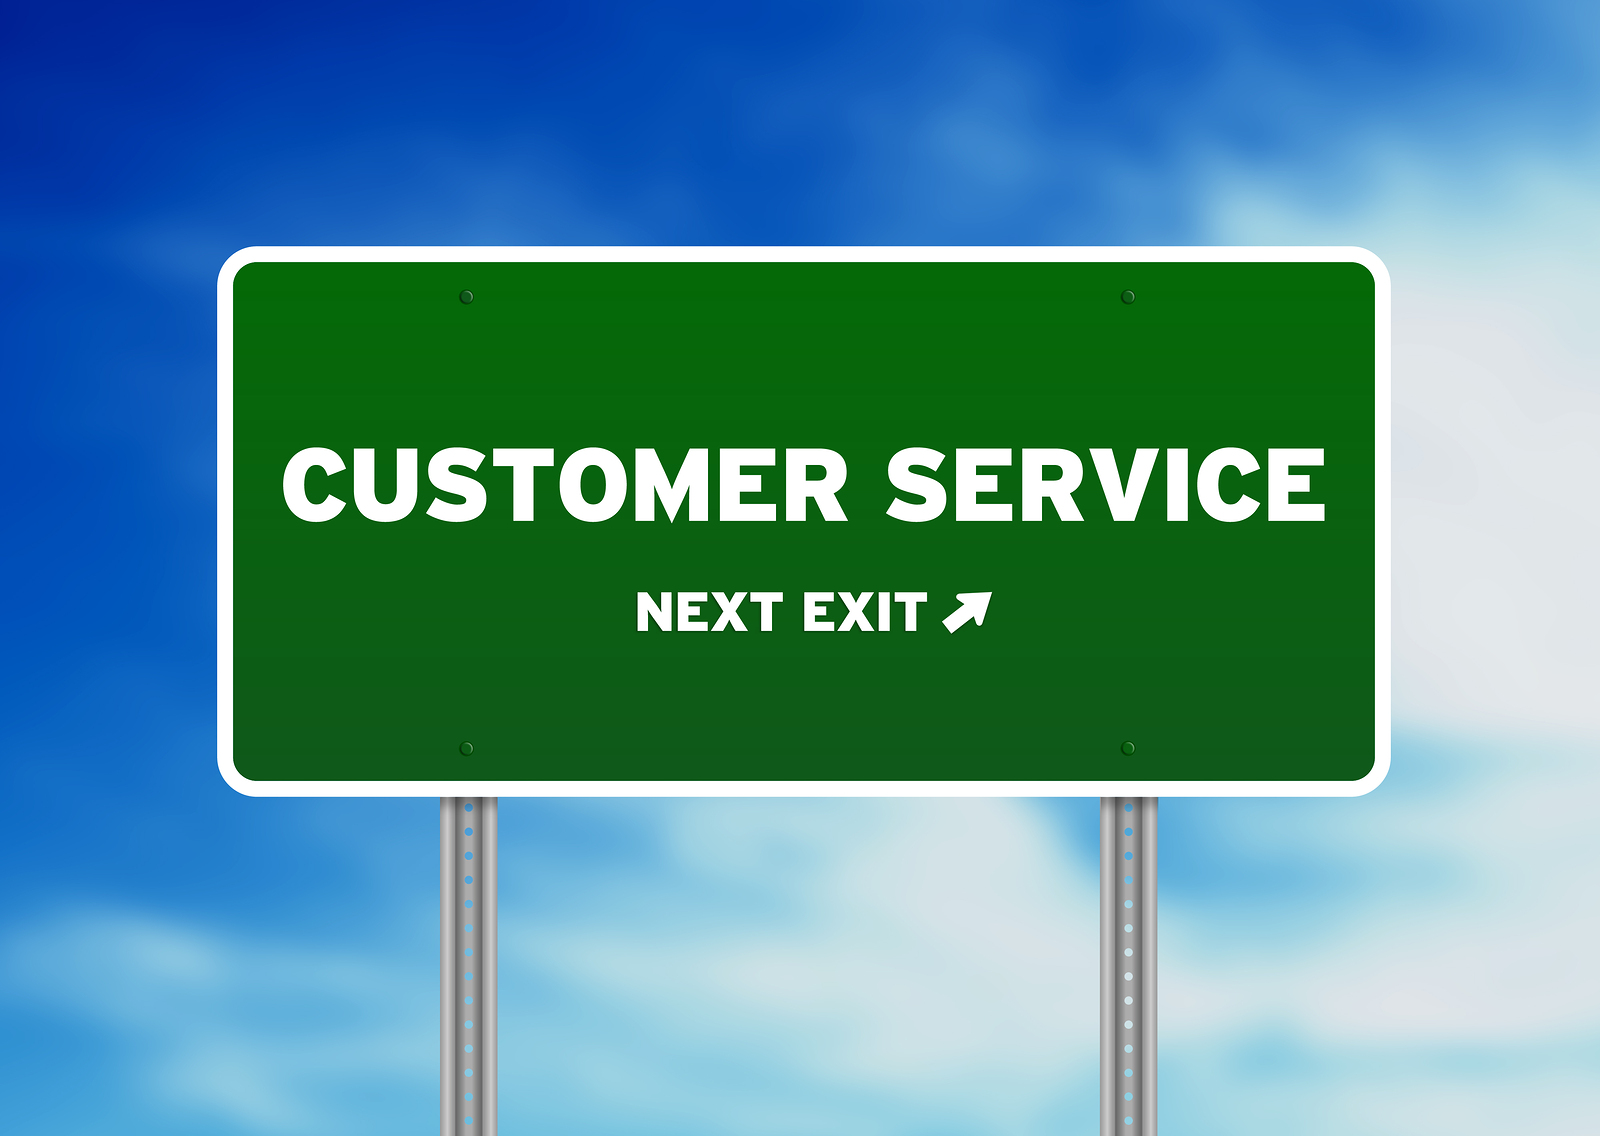 Customer Service For A Business